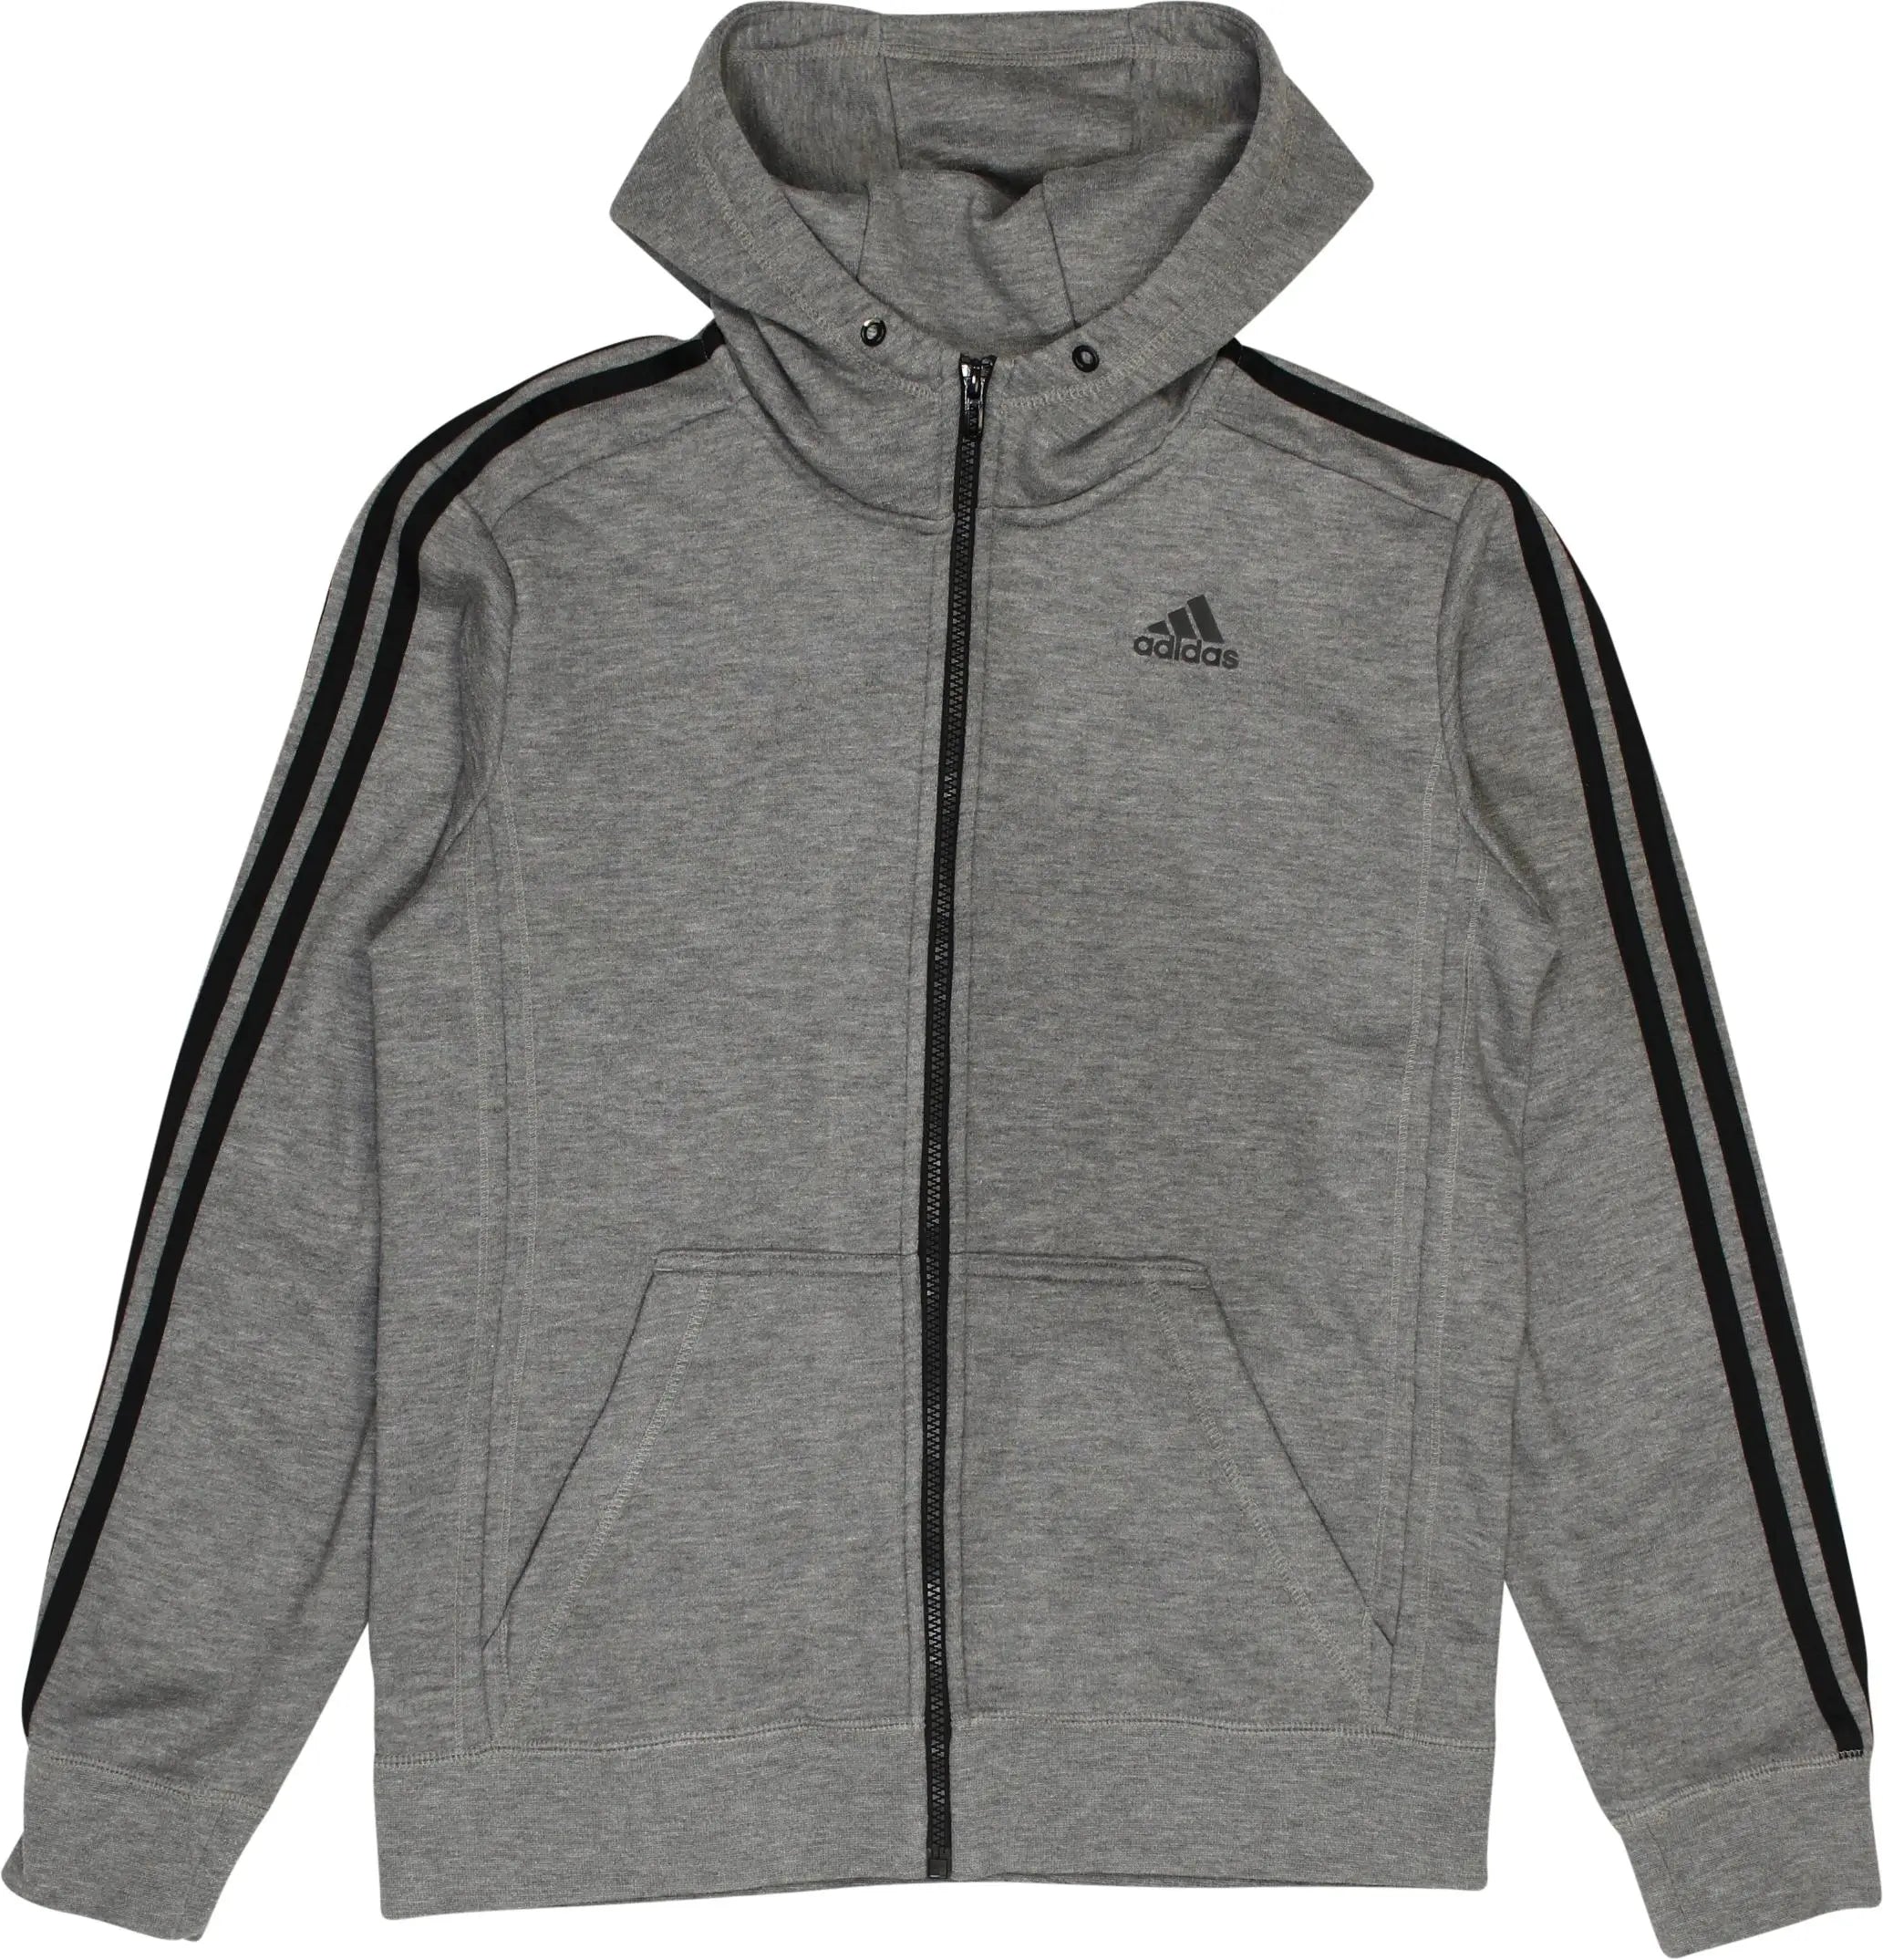 Adidas - Zip Up Hoodie by Adidas- ThriftTale.com - Vintage and second handclothing